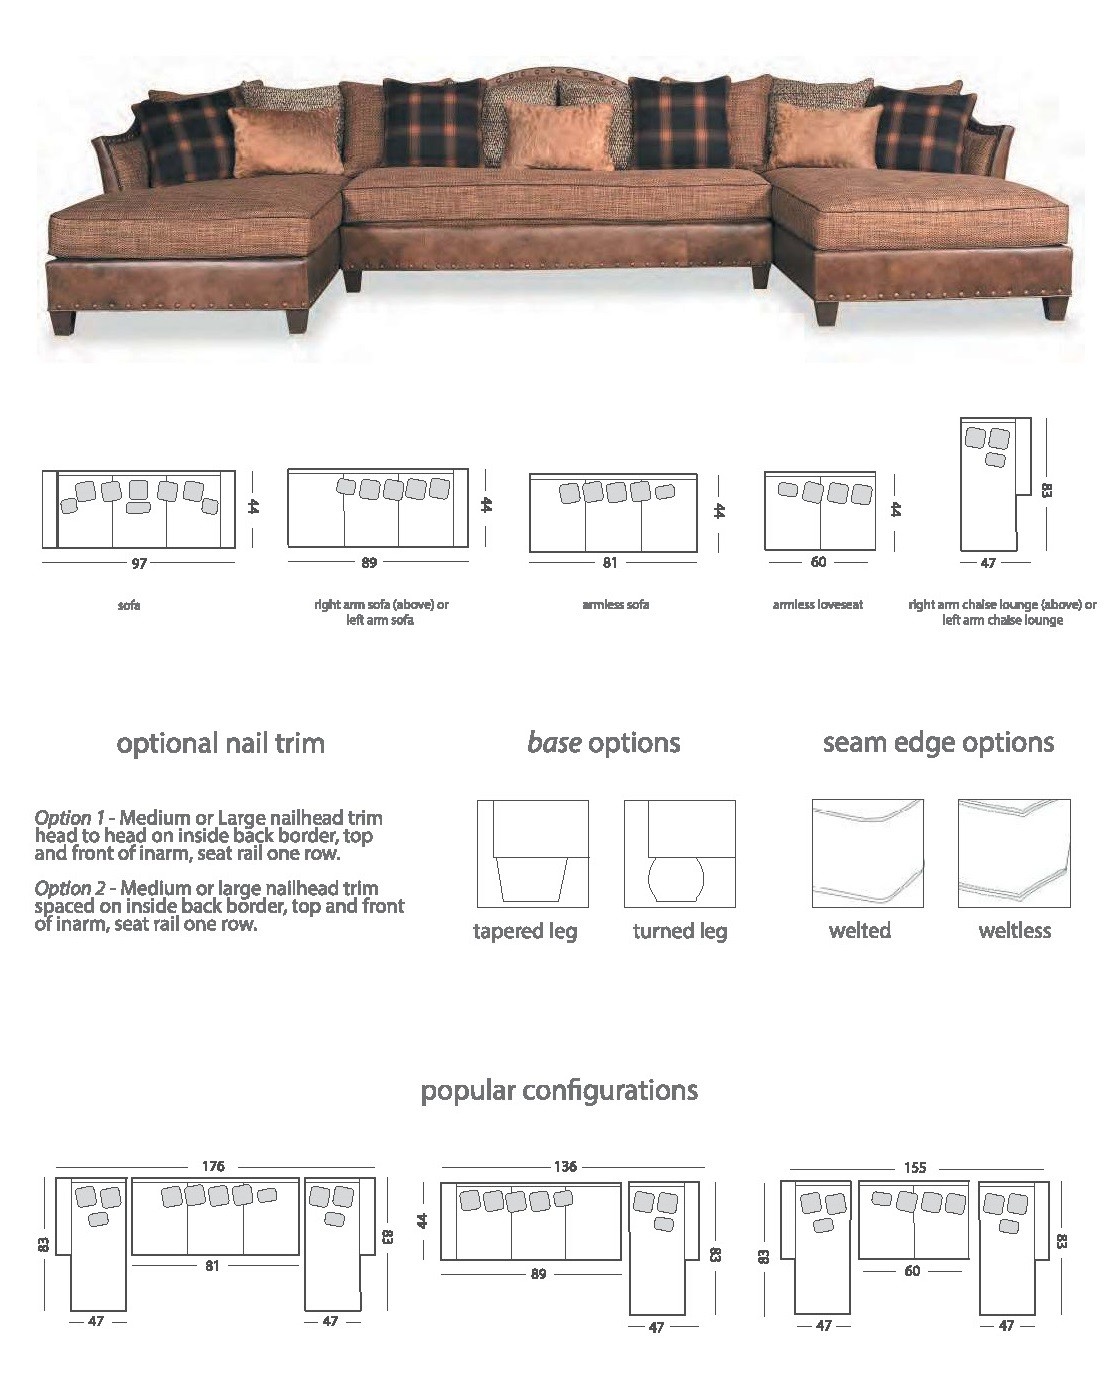 SECTIONALS - Leather & High End Upholstered Furniture Sectional sofa custom configurations 7